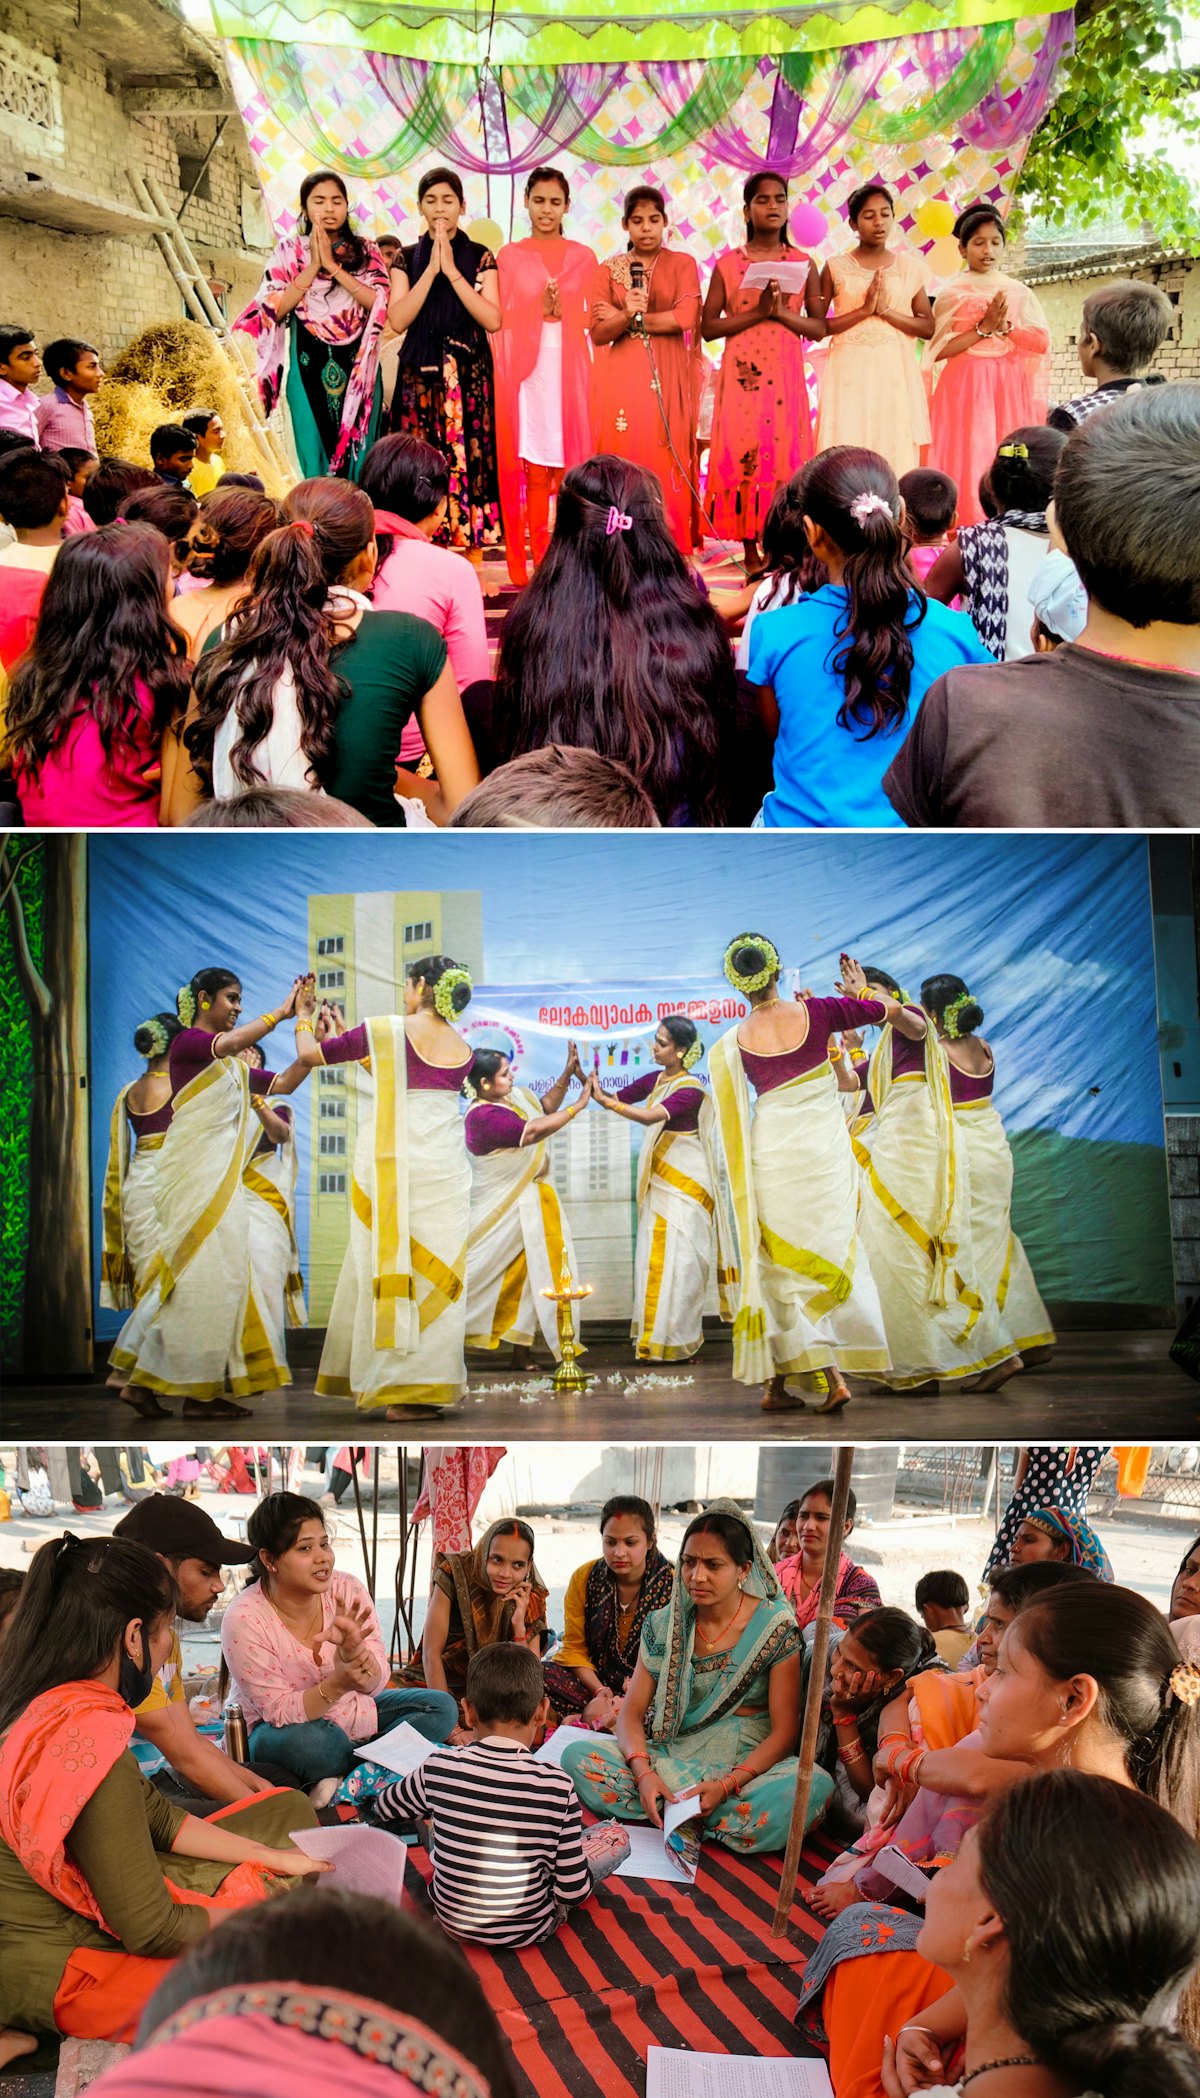 Seen here are participants at local conferences in Bihar and Delhi, India. The middle image shows participants performing a traditional dance.